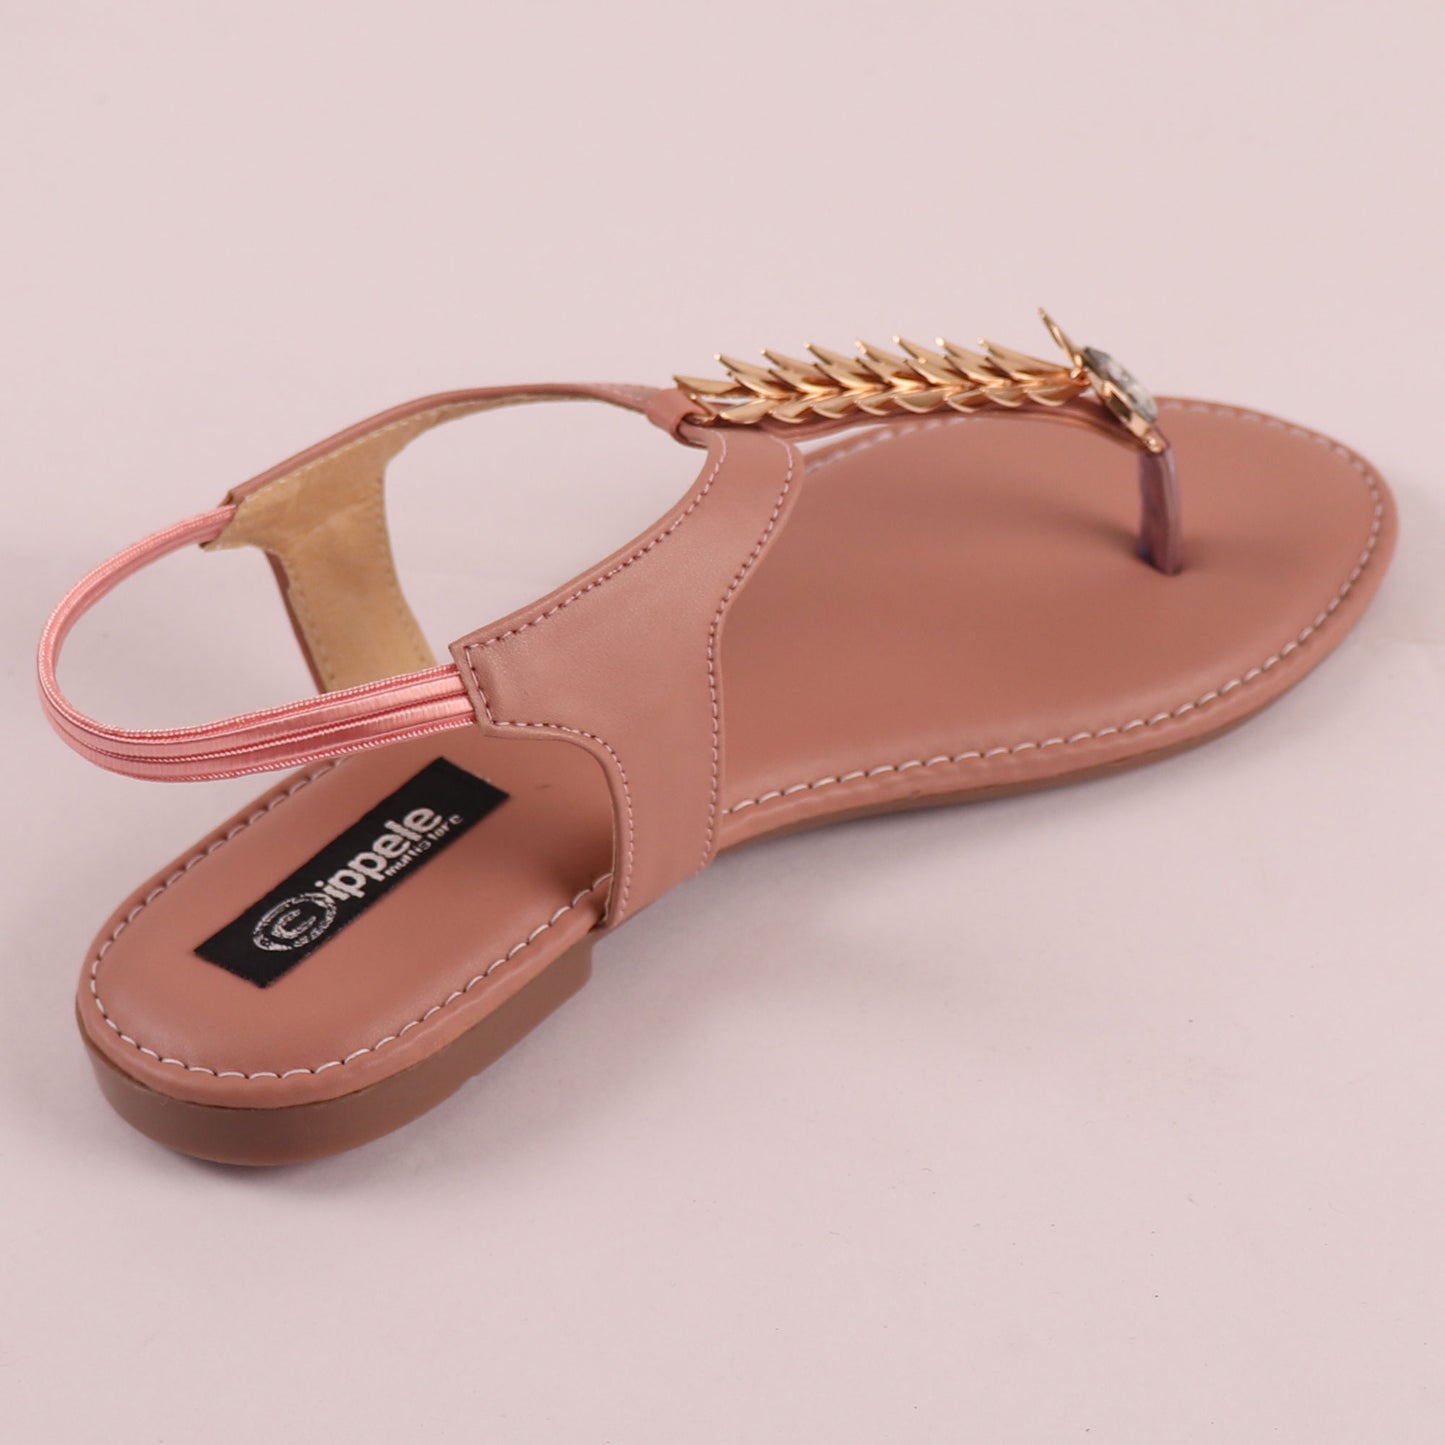 Foot Wear,The Palm Branch Flats in Pink - Cippele Multi Store